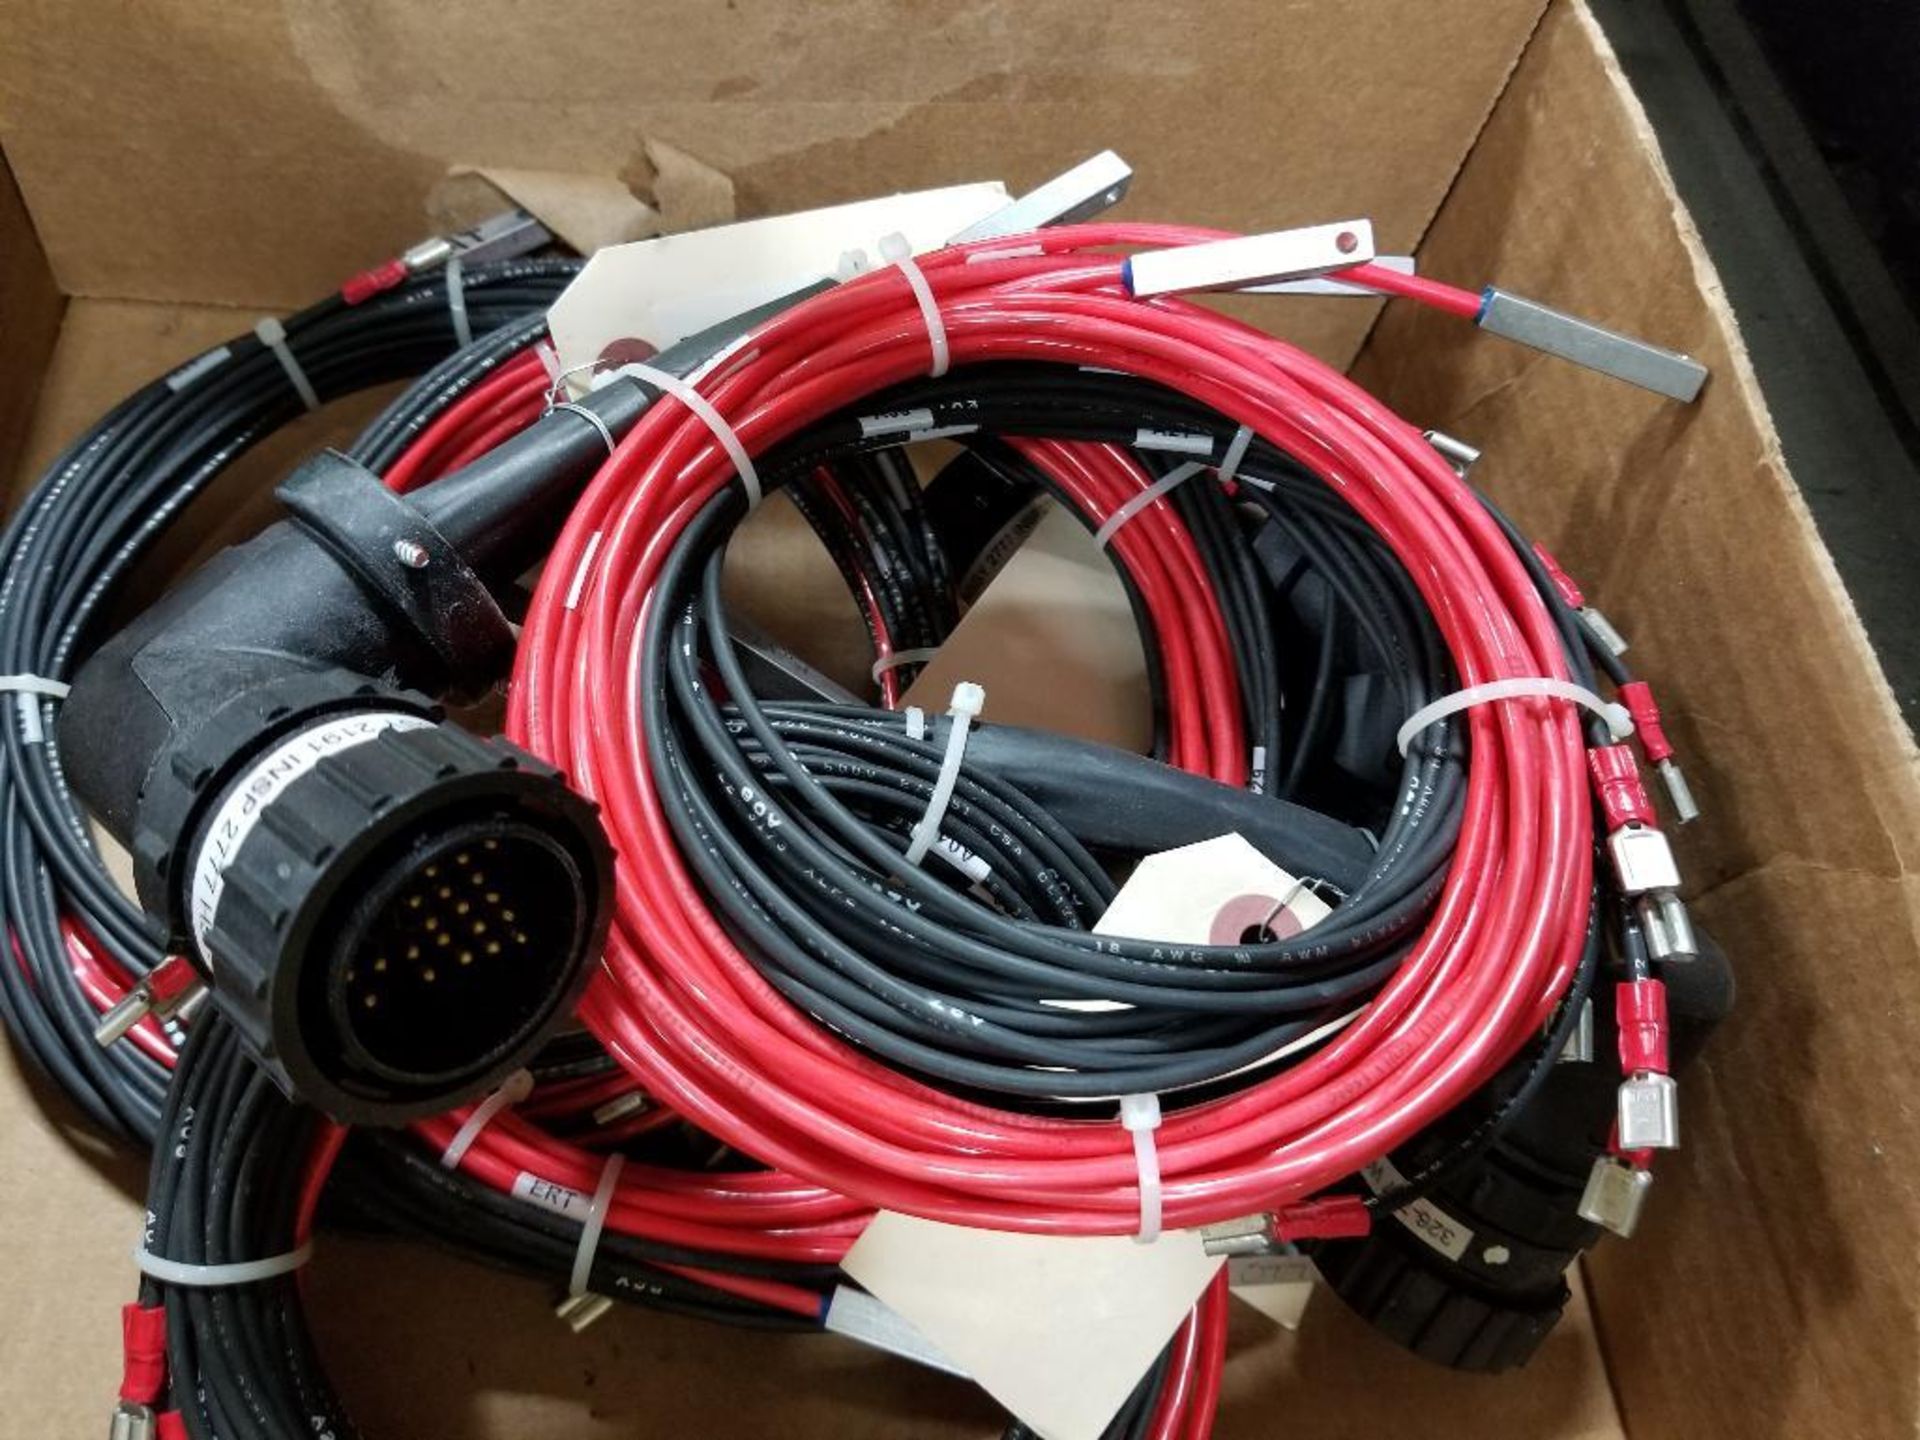 Qty 4 - Cable assemblies. New. - Image 2 of 4